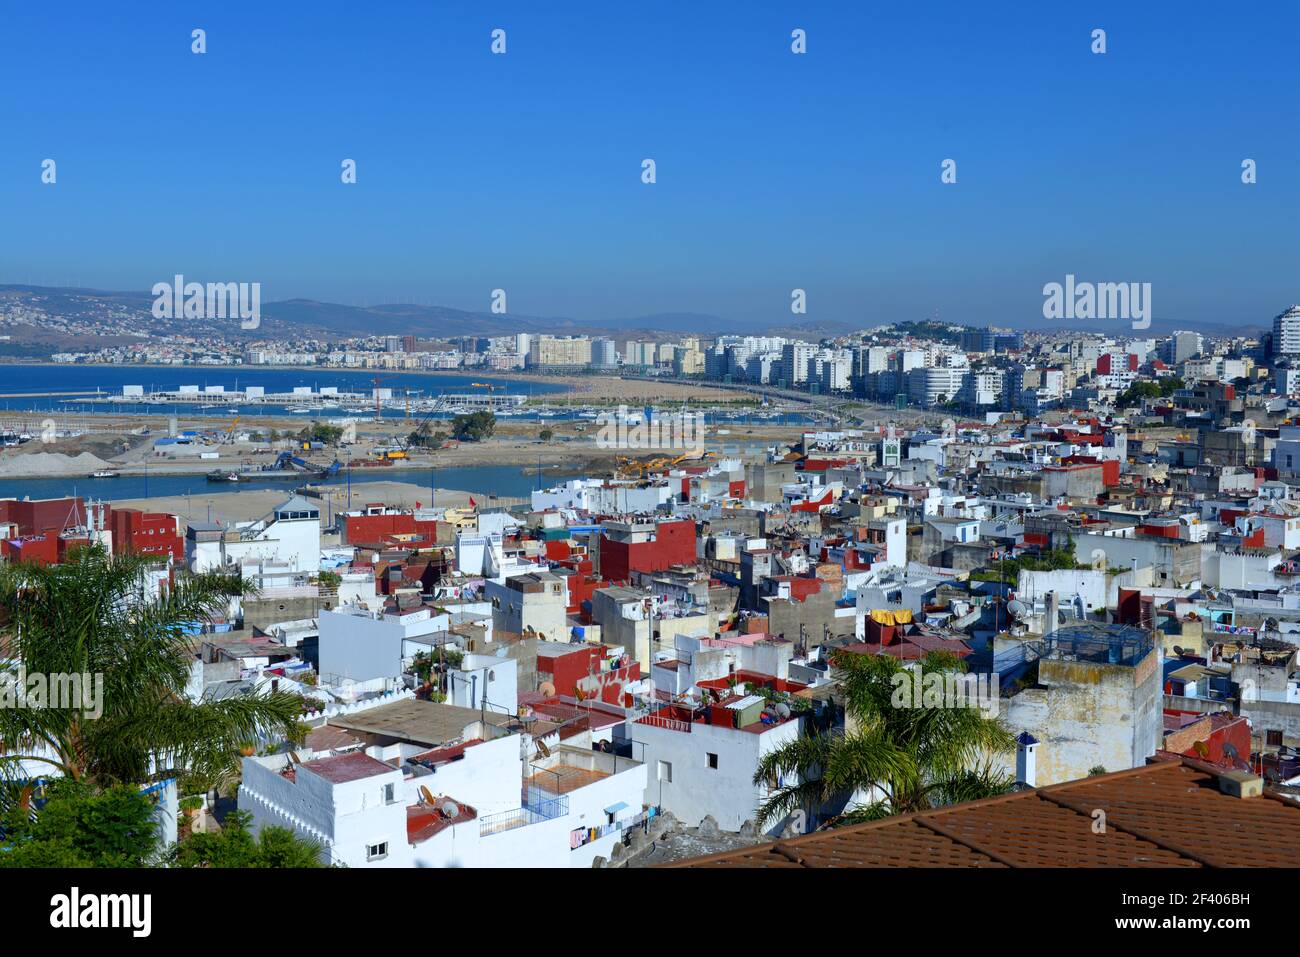 The old medina and the port of Tangier, Morocco Stock Photo